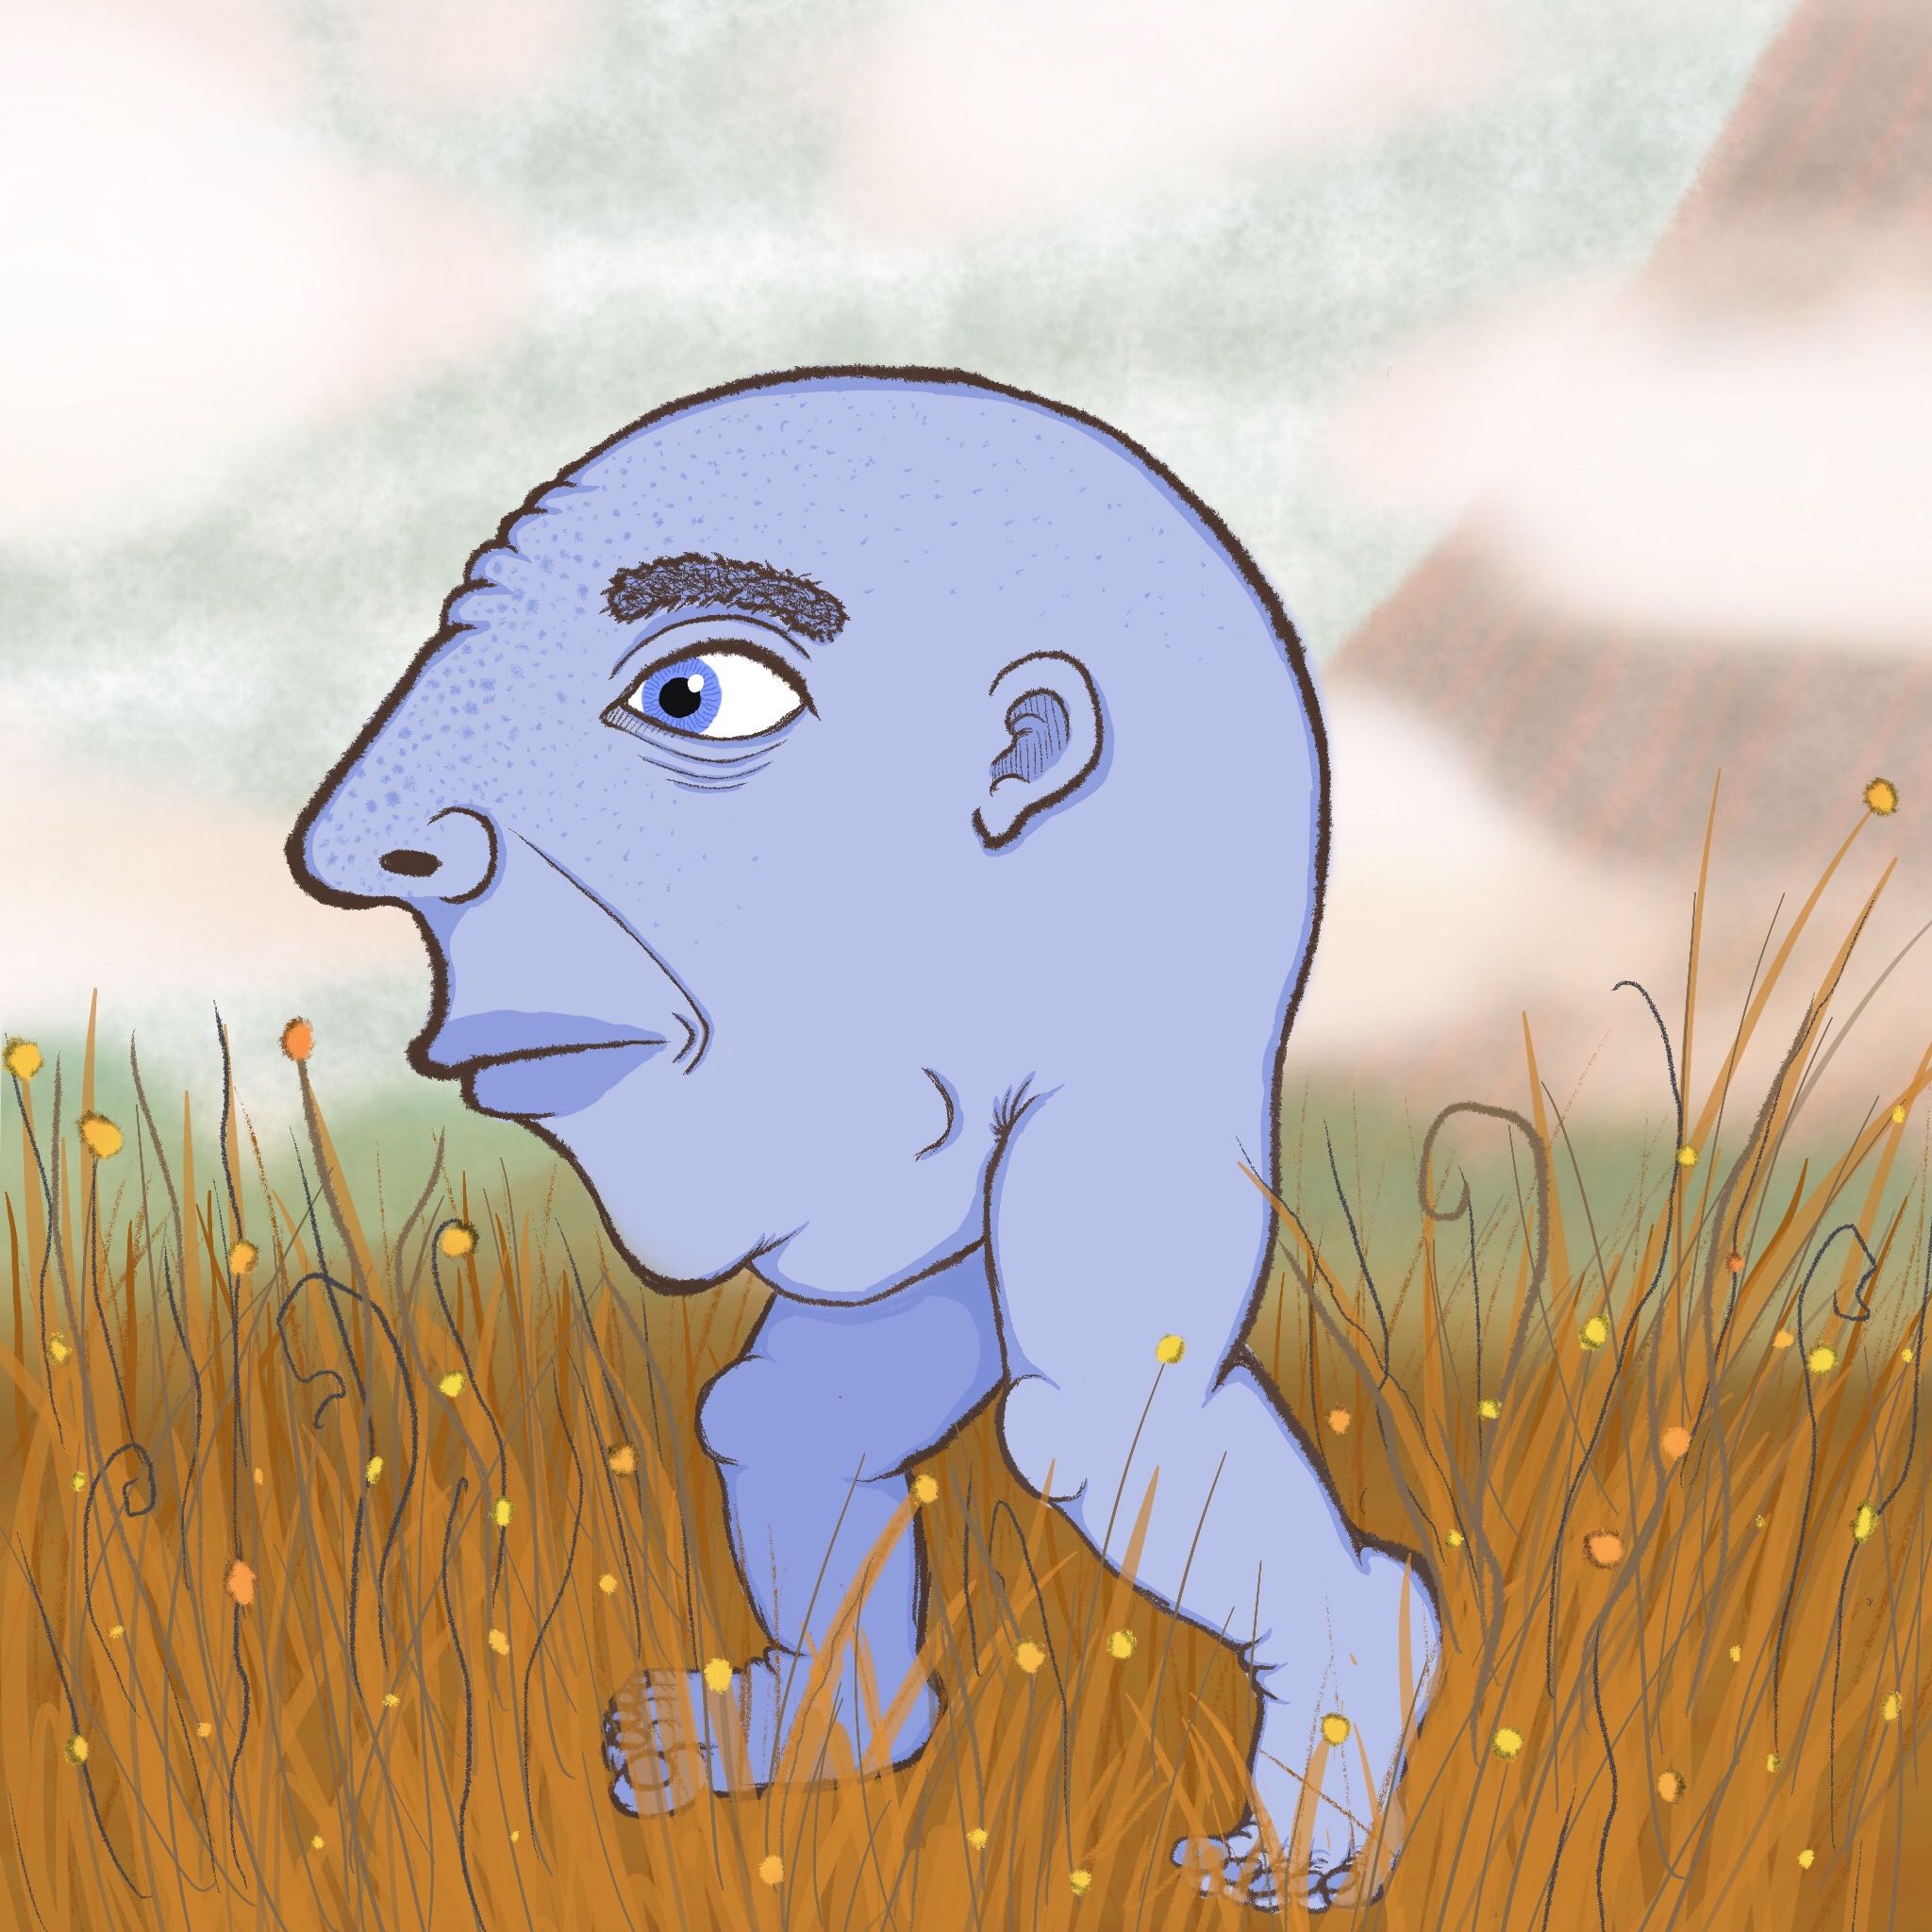 A bald, blue head, perched on two blue legs, stands among tall yellow grass, in front of a misty mountain.